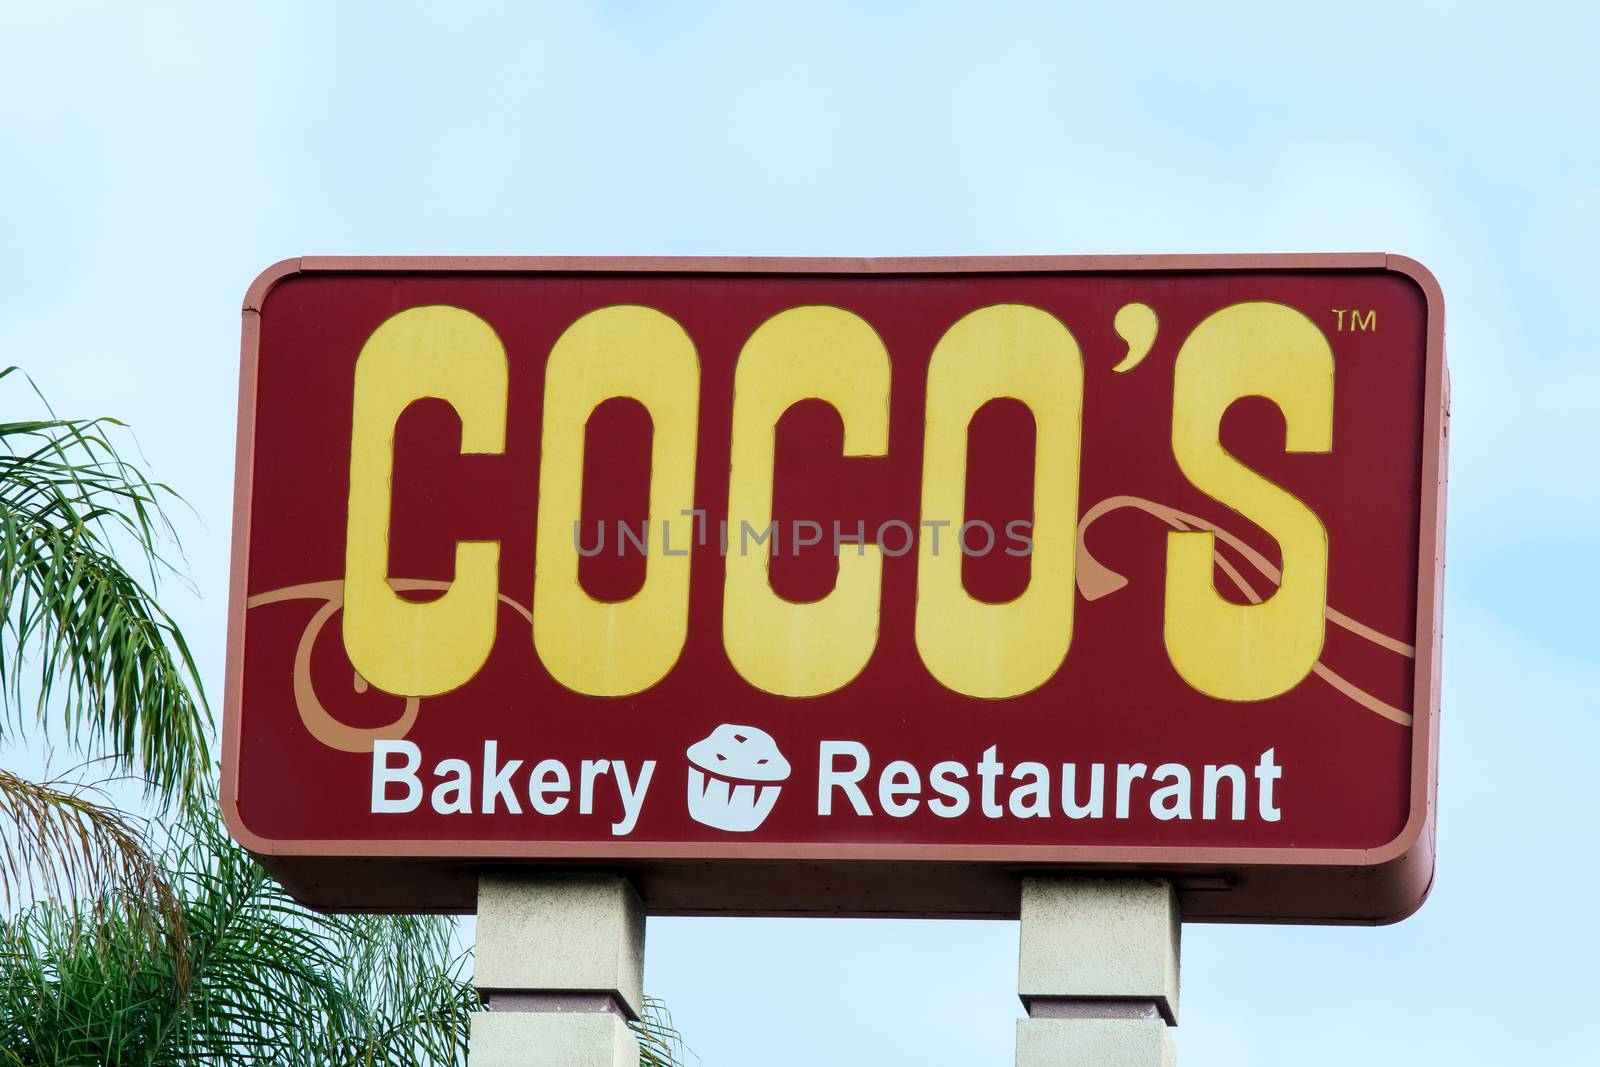 Coco's Restaurant  Sign by wolterk